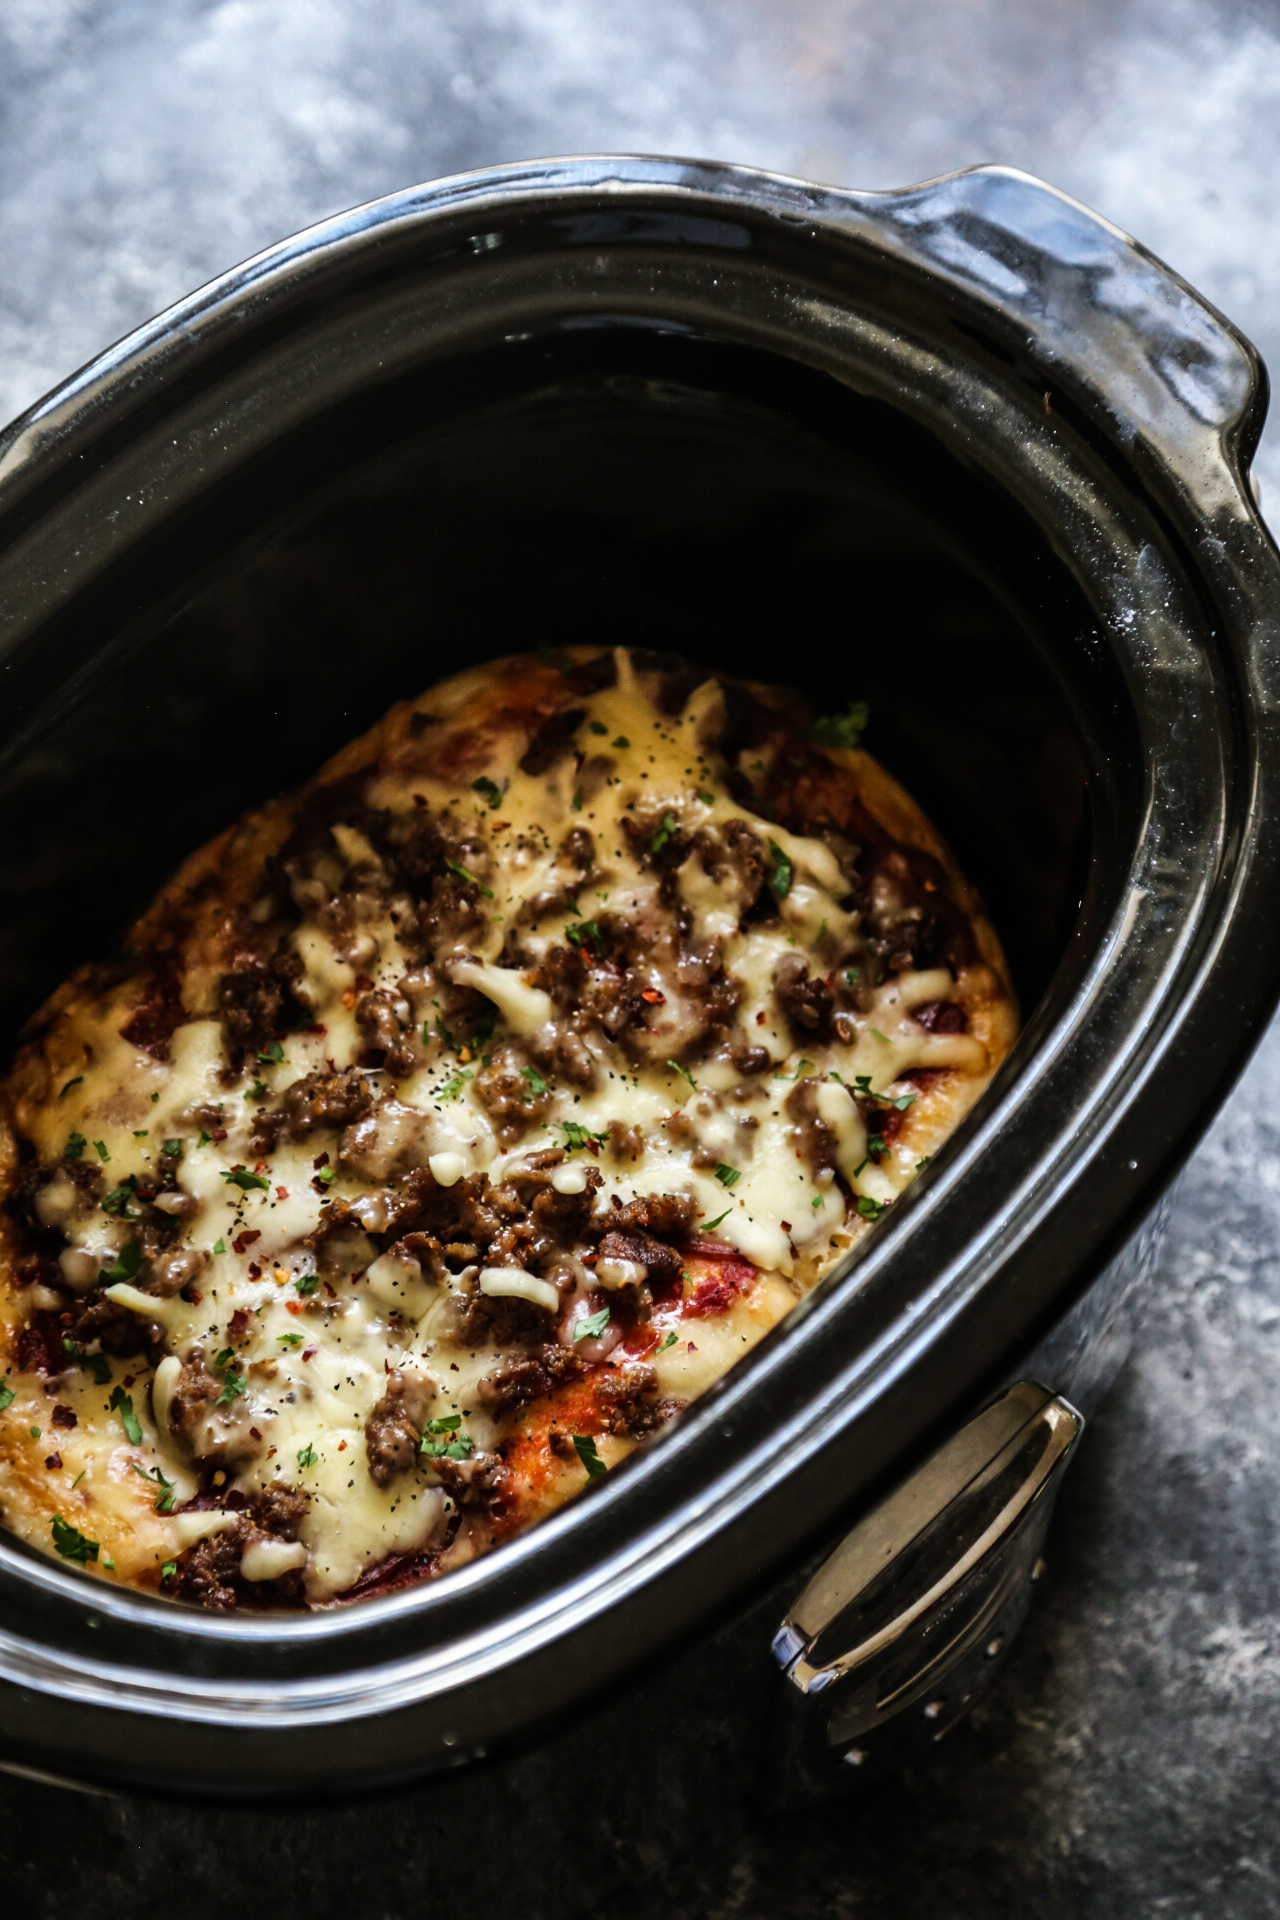 Slow Cooker Meat Lovers Pizza - The Curious Plate